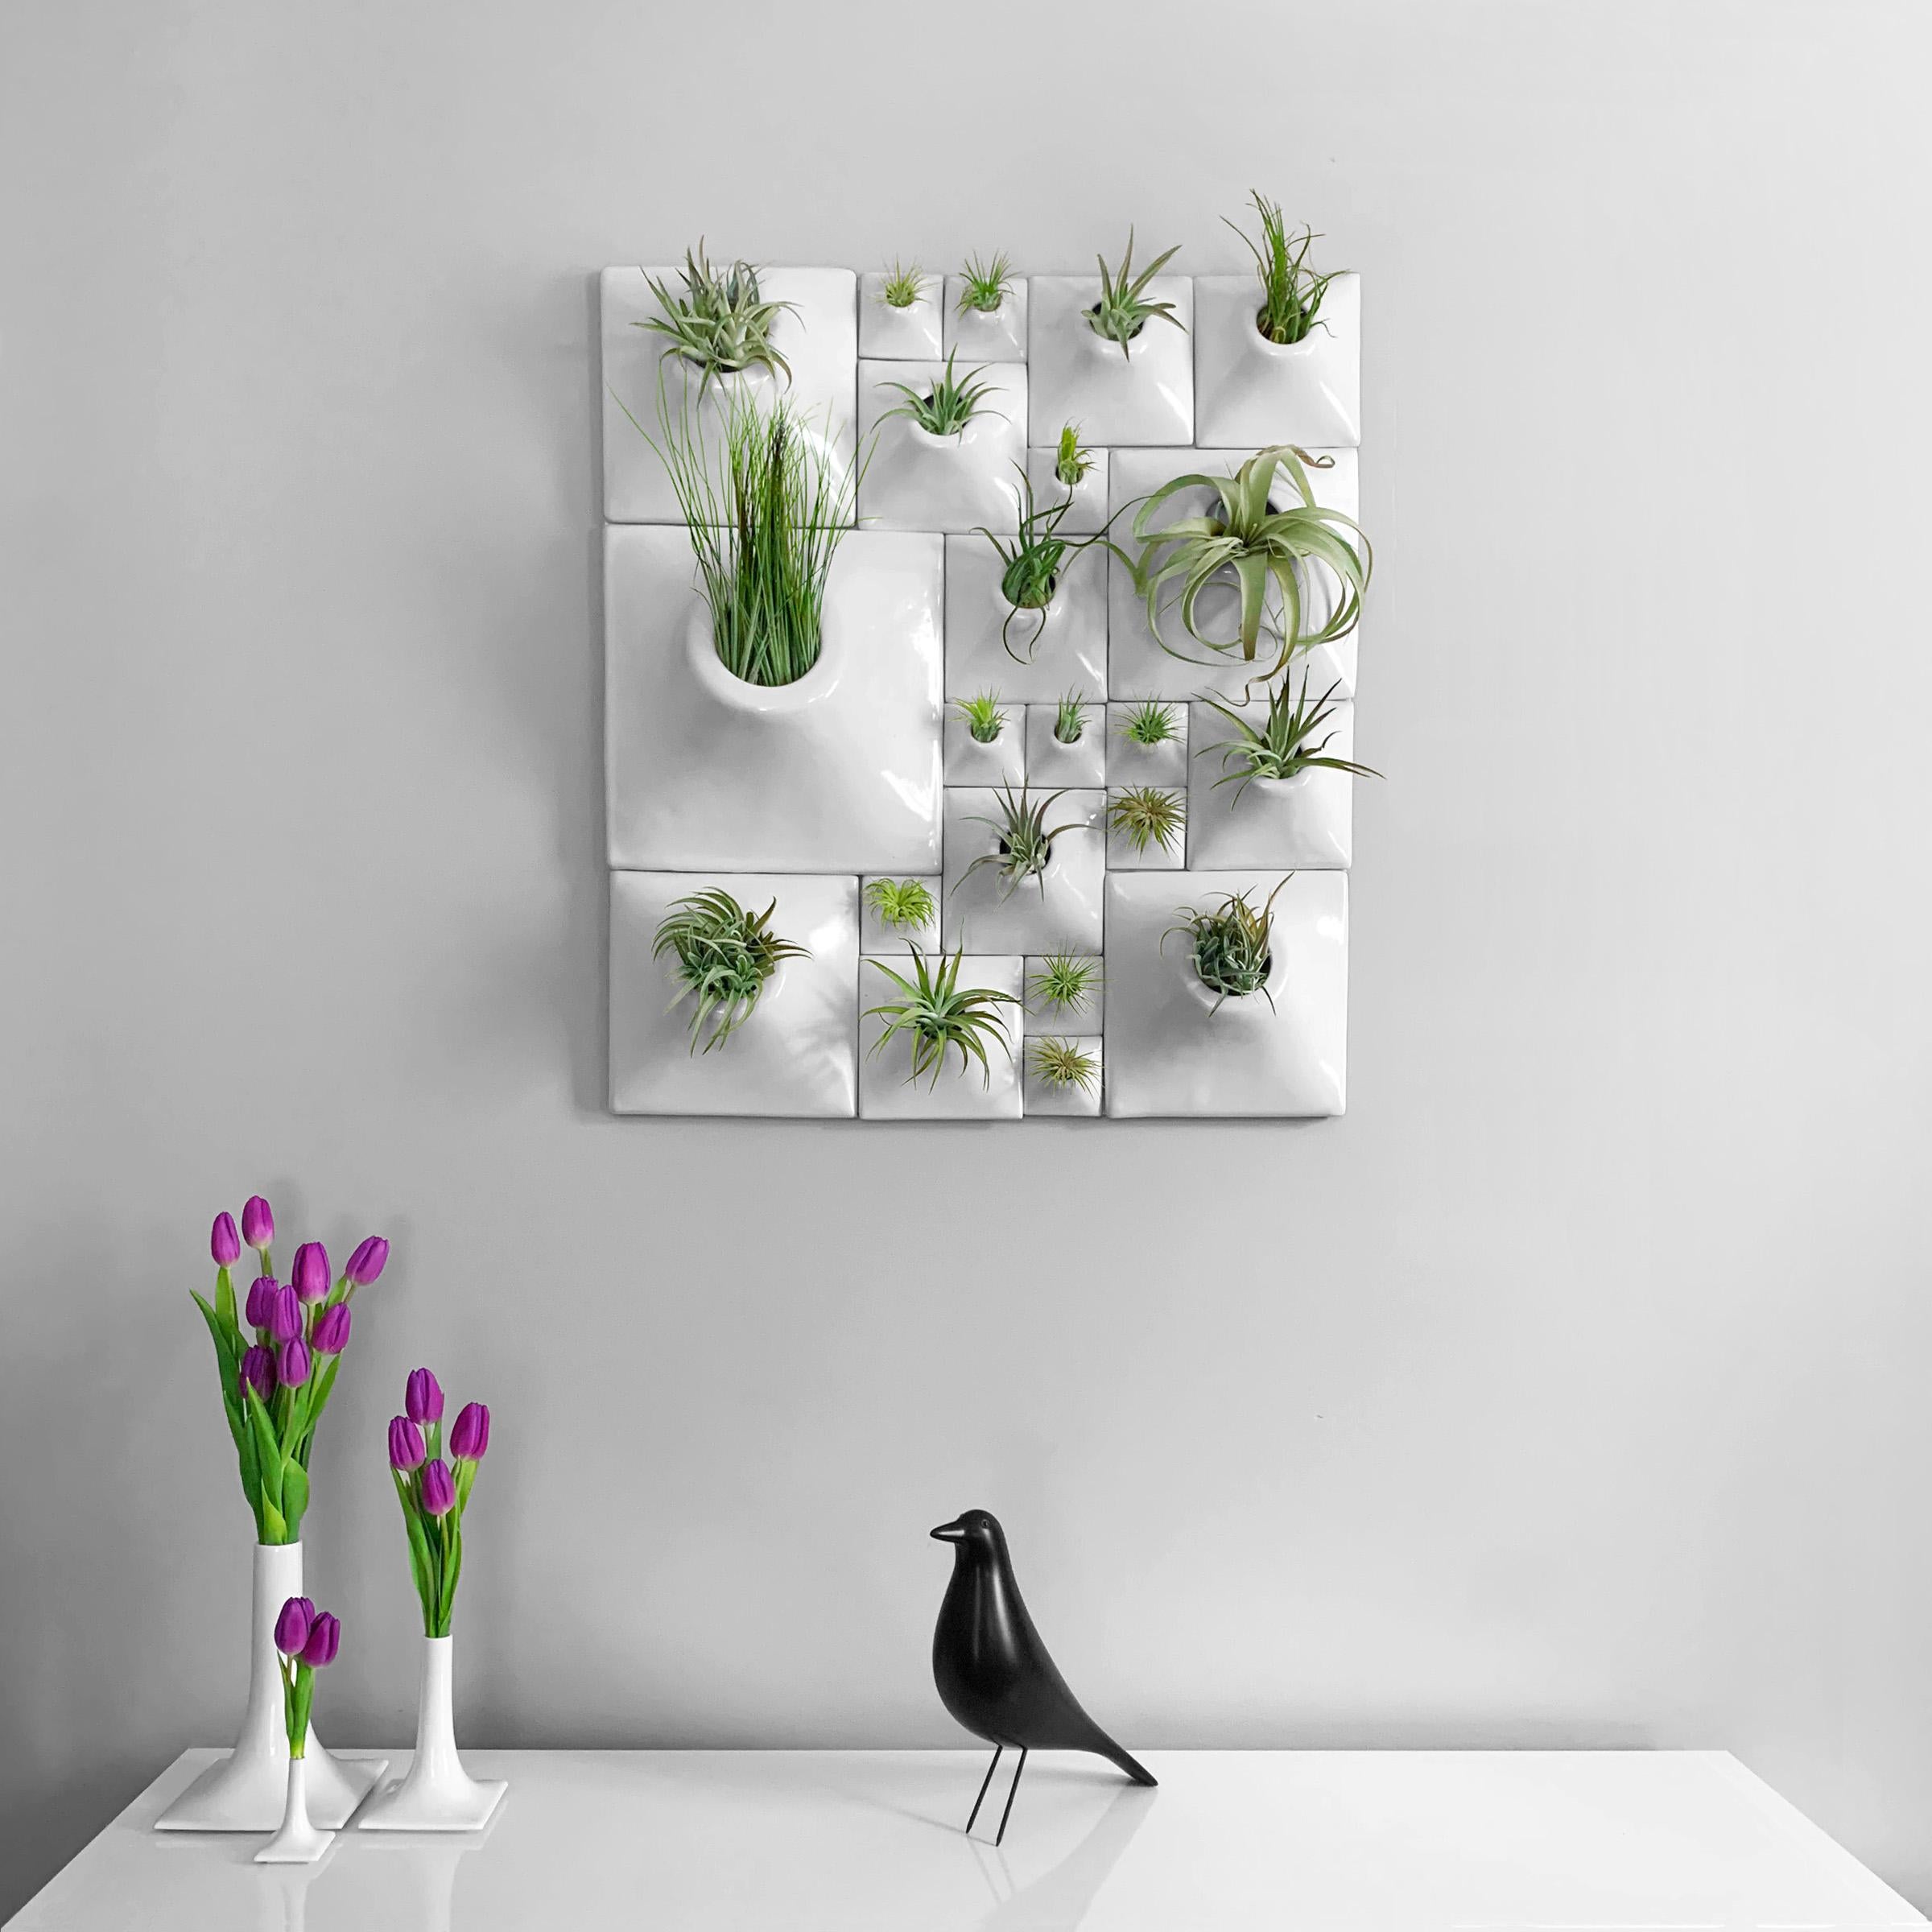 Modern Wall Sculpture, Biophilic Wall Art, Living Wall Decor, Price per Sq Ft For Sale 4